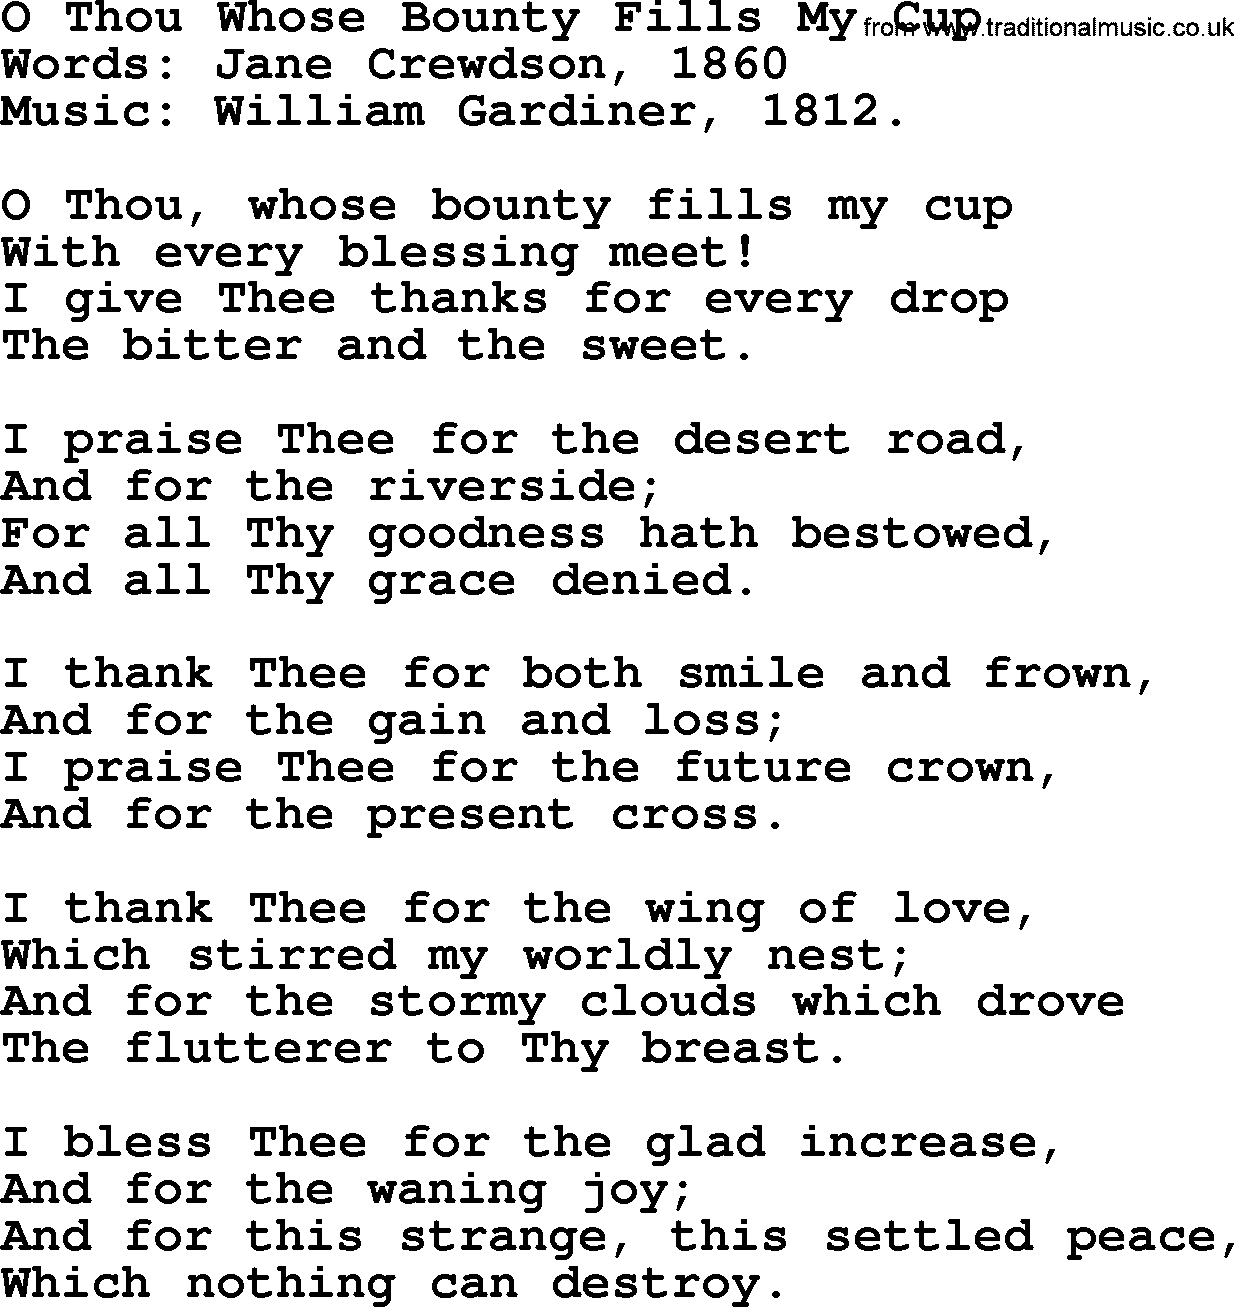 Thanksgiving Hymns and Songs: O Thou Whose Bounty Fills My Cup lyrics with PDF